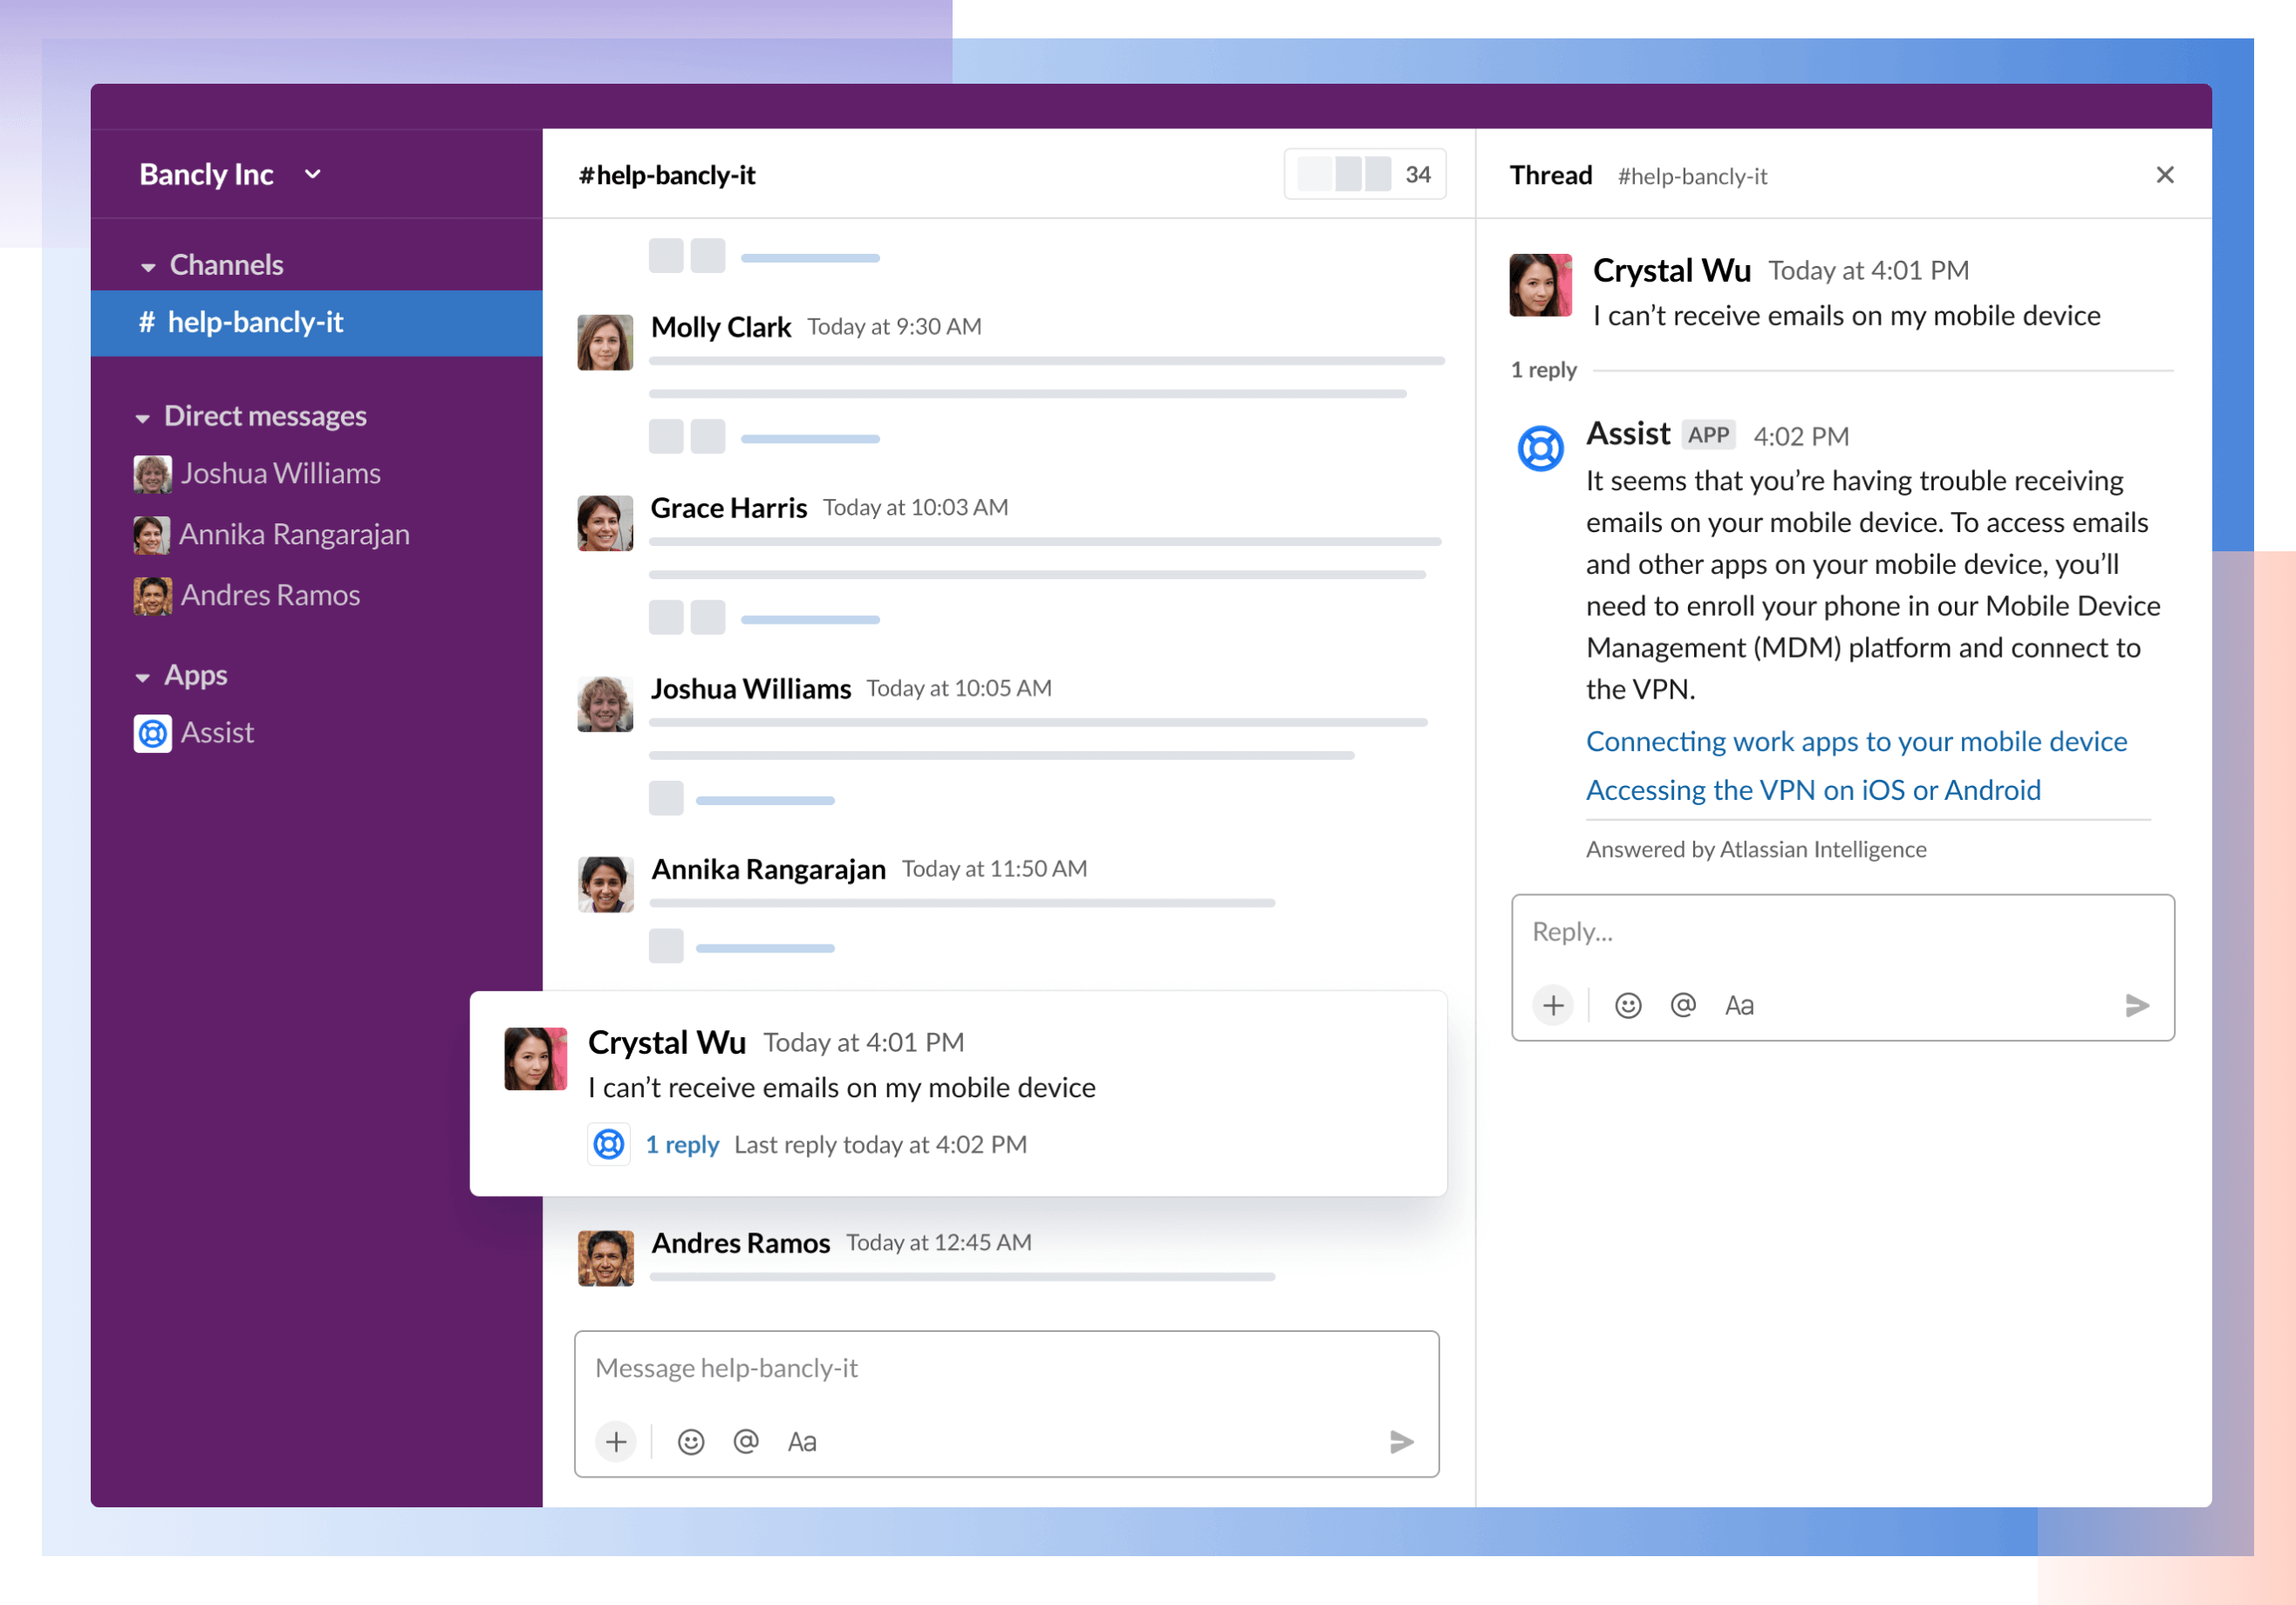 Atlassian Assist replying to a customer in Slack with IT help